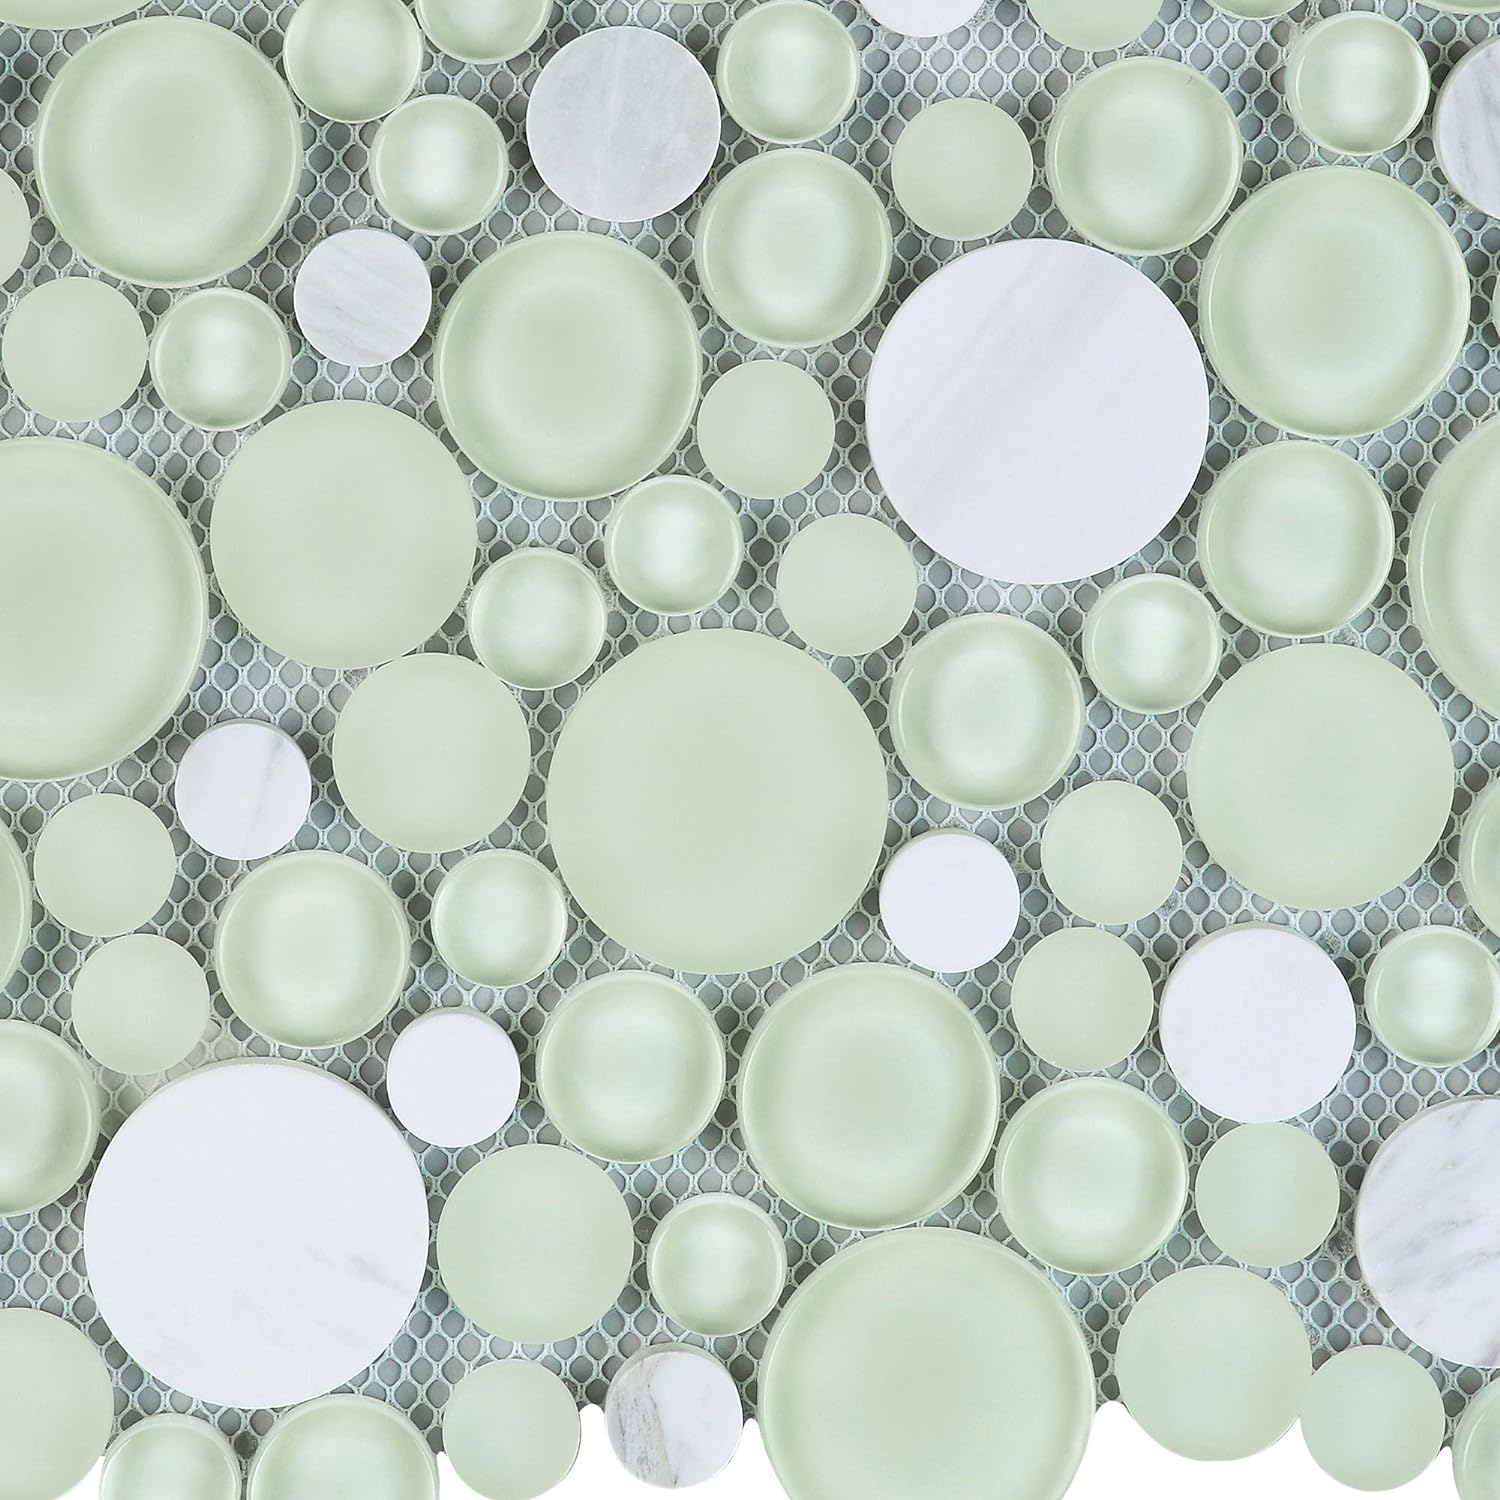 TBUBWG-01 Random Circle Glass Mix Stone Mosaic wall Tile in Mint Green and White